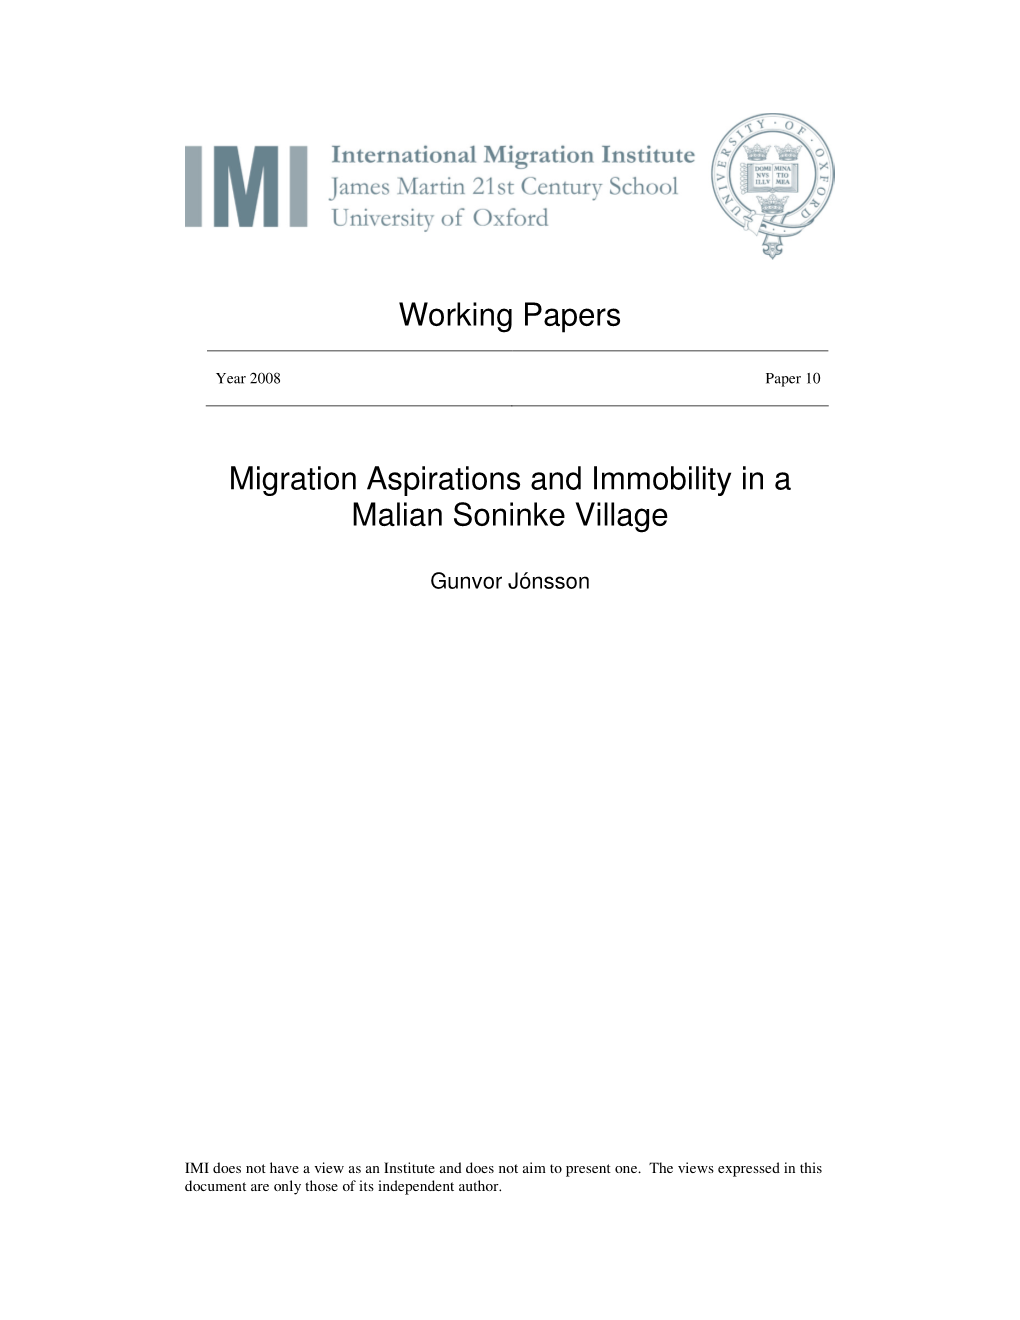 Migration Aspirations and Immobility in a Malian Soninke Village